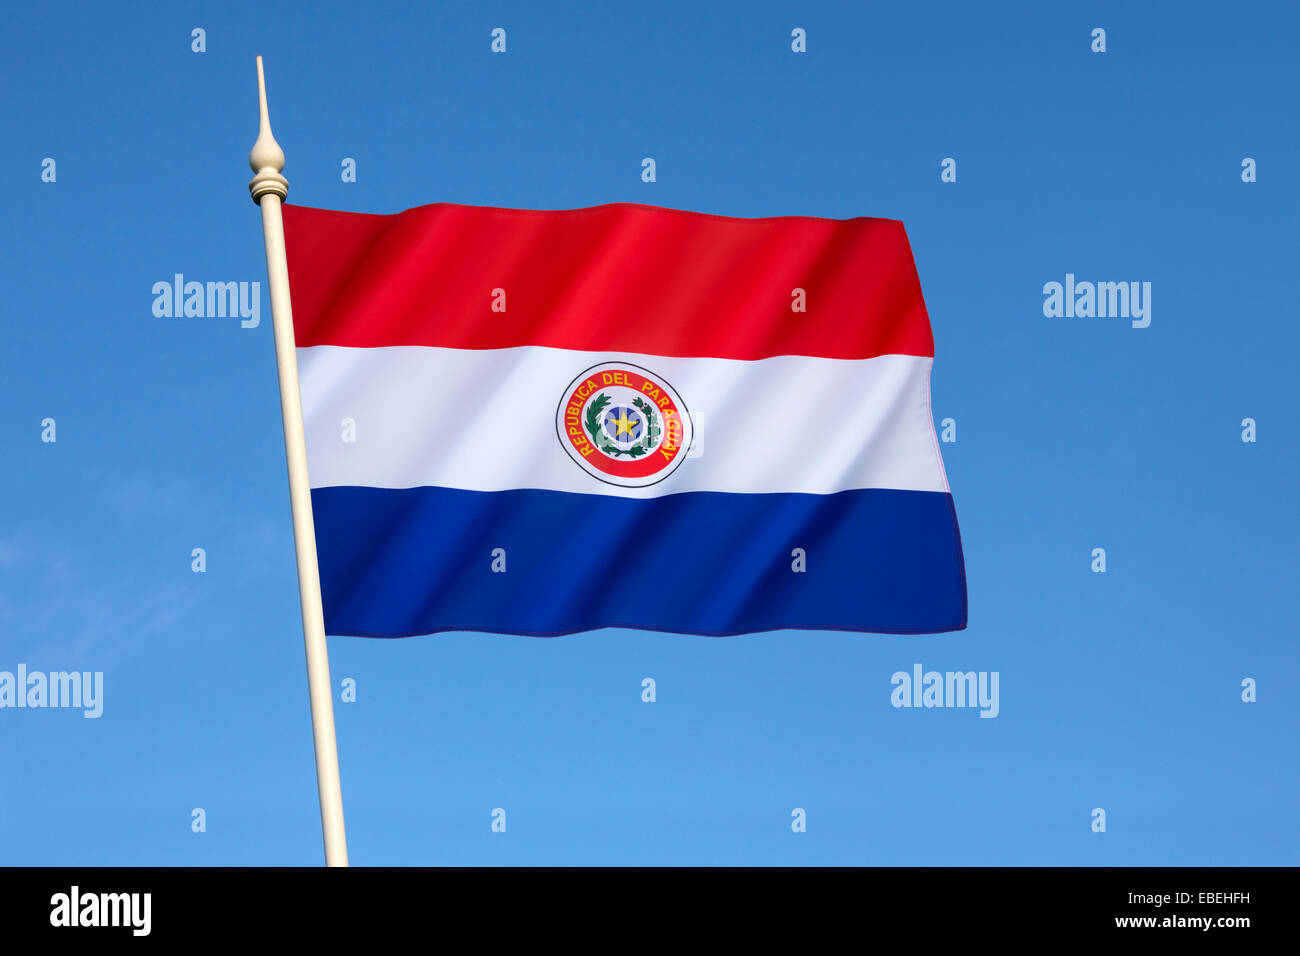 National flag of Paraguay Stock Photo